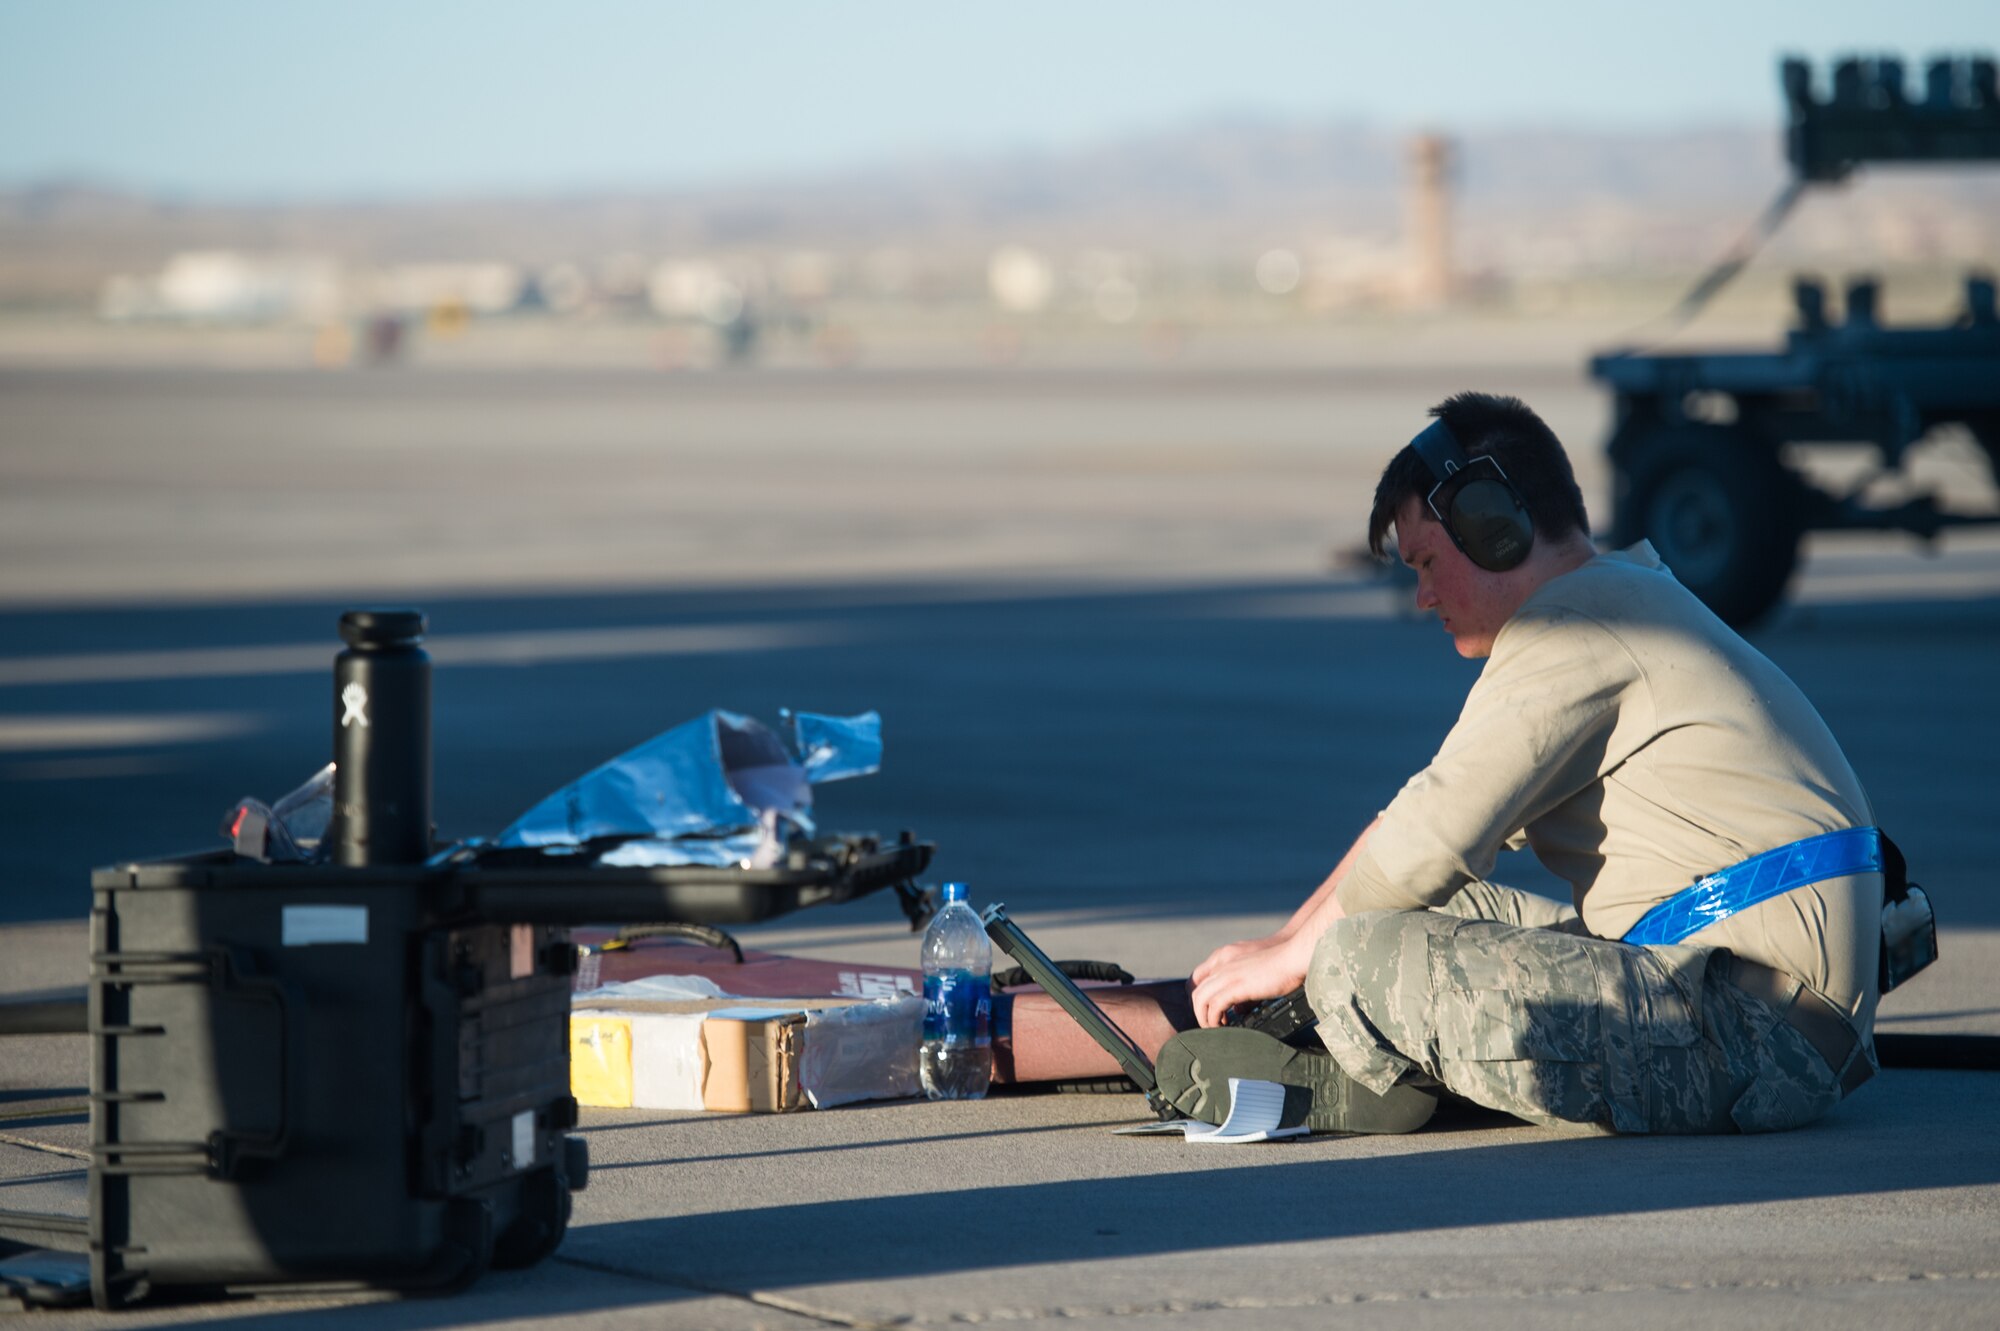 U.S. Air Force Airman 1st Class Zachary Perry, 94th Aircraft Maintenance Unit integrated avionics journeyman, runs checks after performing maintenance on an F-22 Raptor at Nellis Air Force Base, Nevada, July 16, 2019.